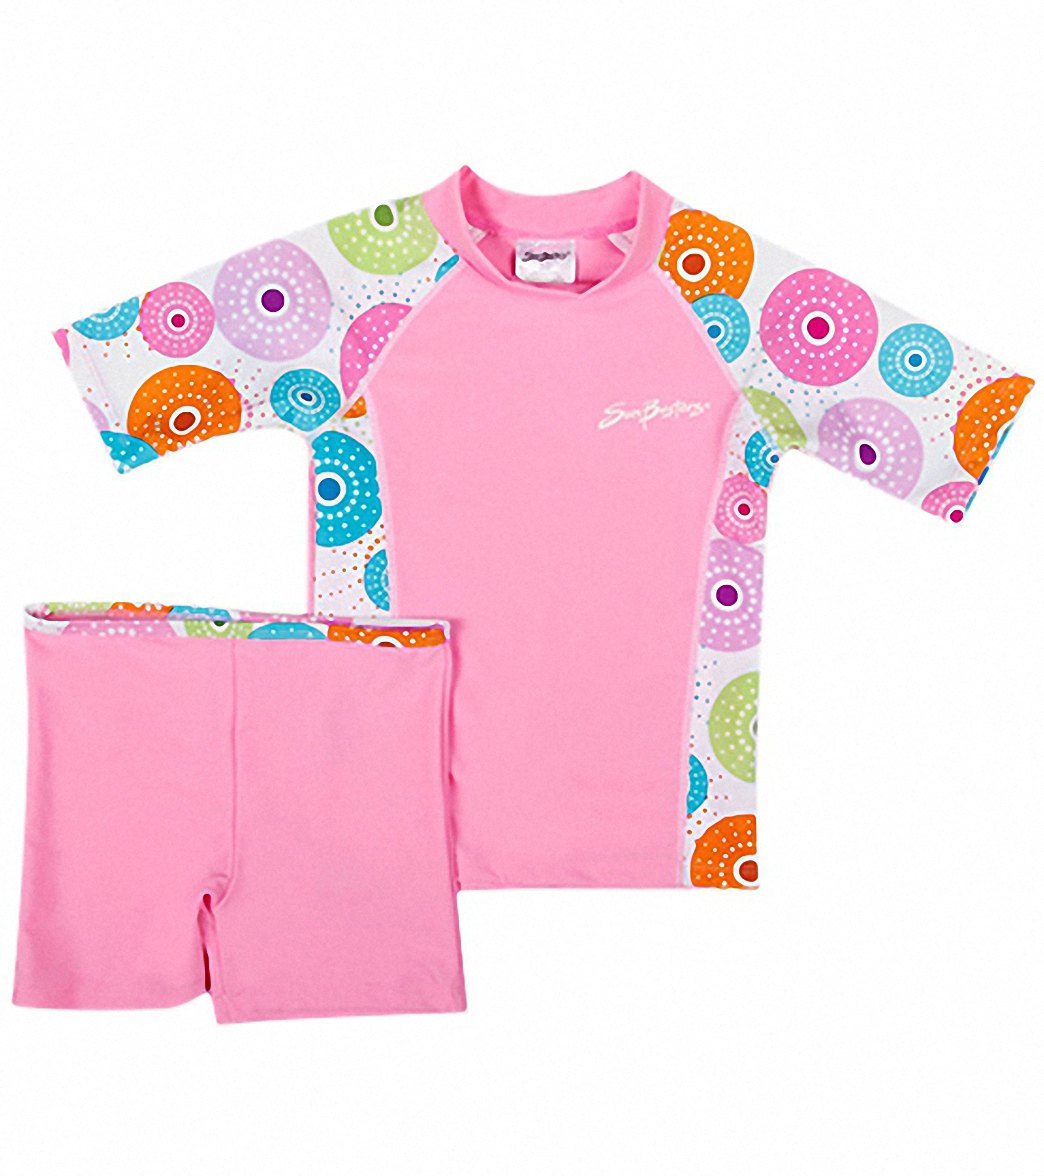 SunBusters Girls' Fitted S/S Rashguard Set (6mos-12yrs) at SwimOutlet.com